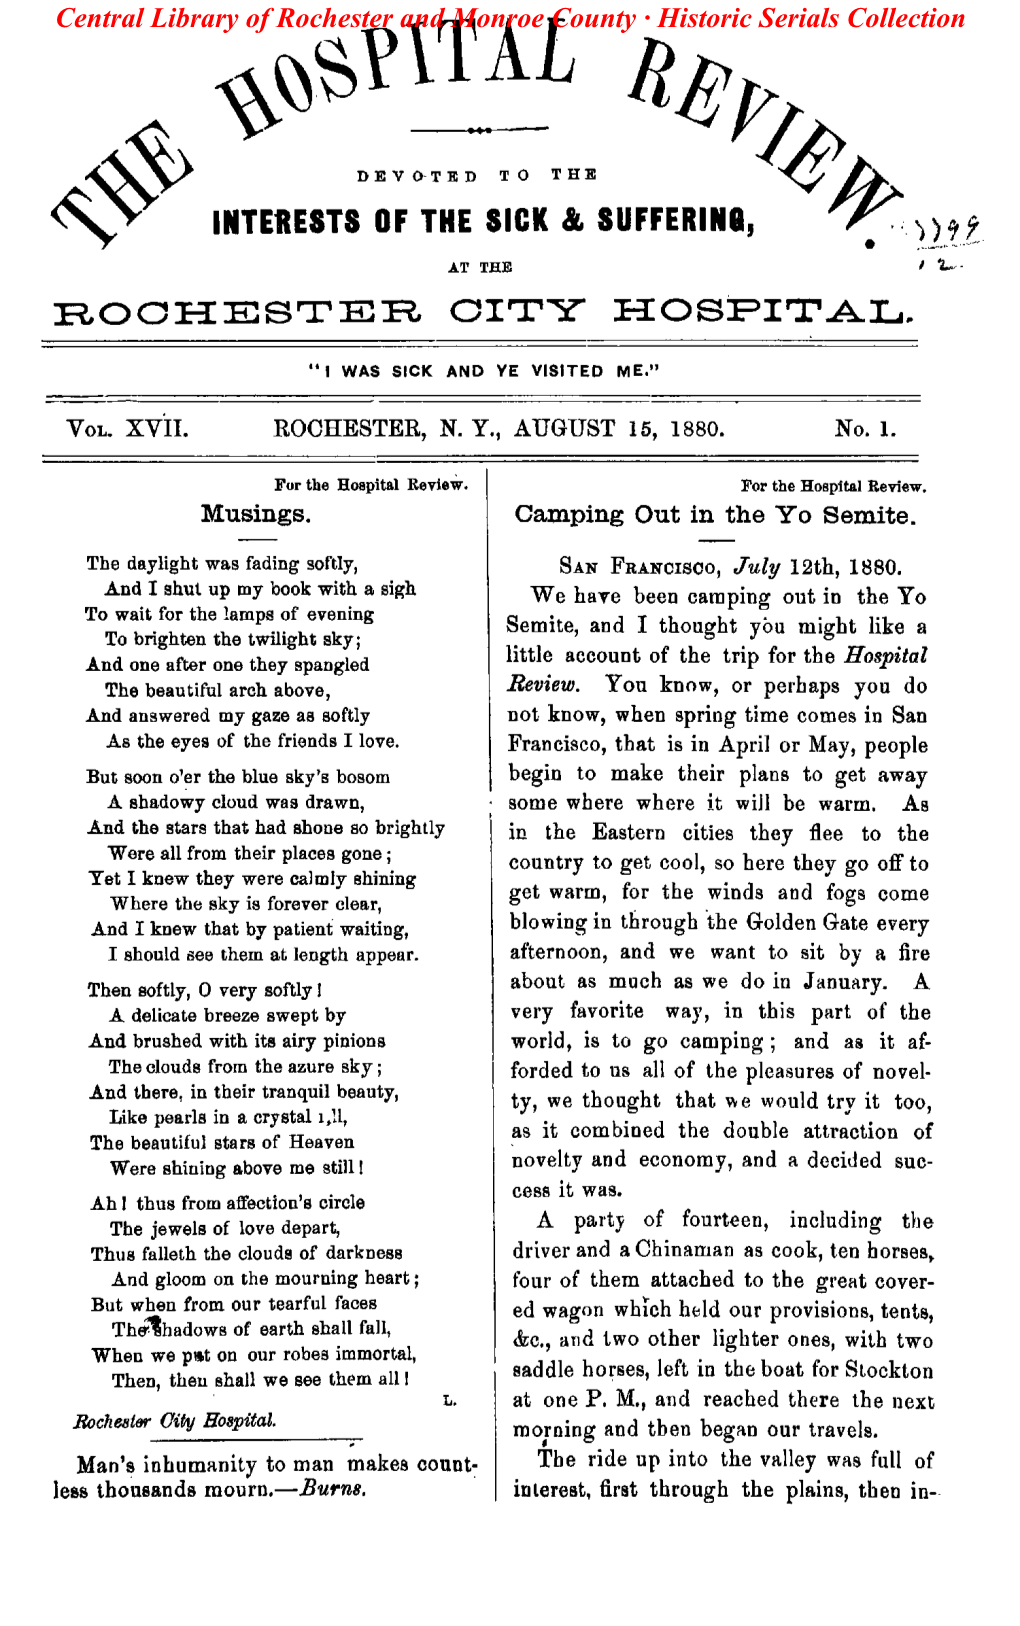 Interests of the Sick & Suffering, Rochester City